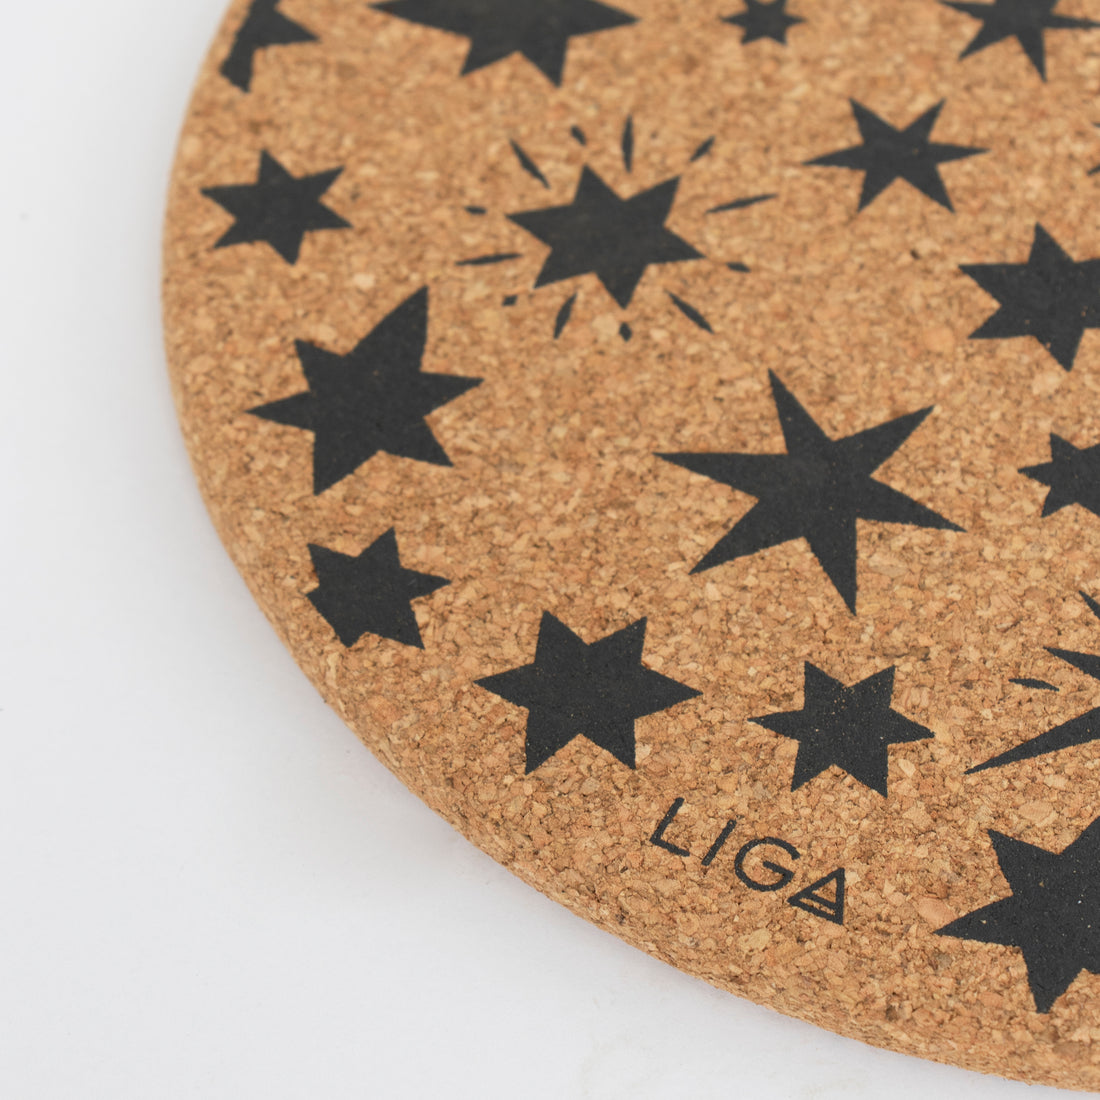 Eco friendly cork placemats + coasters. Grey star design